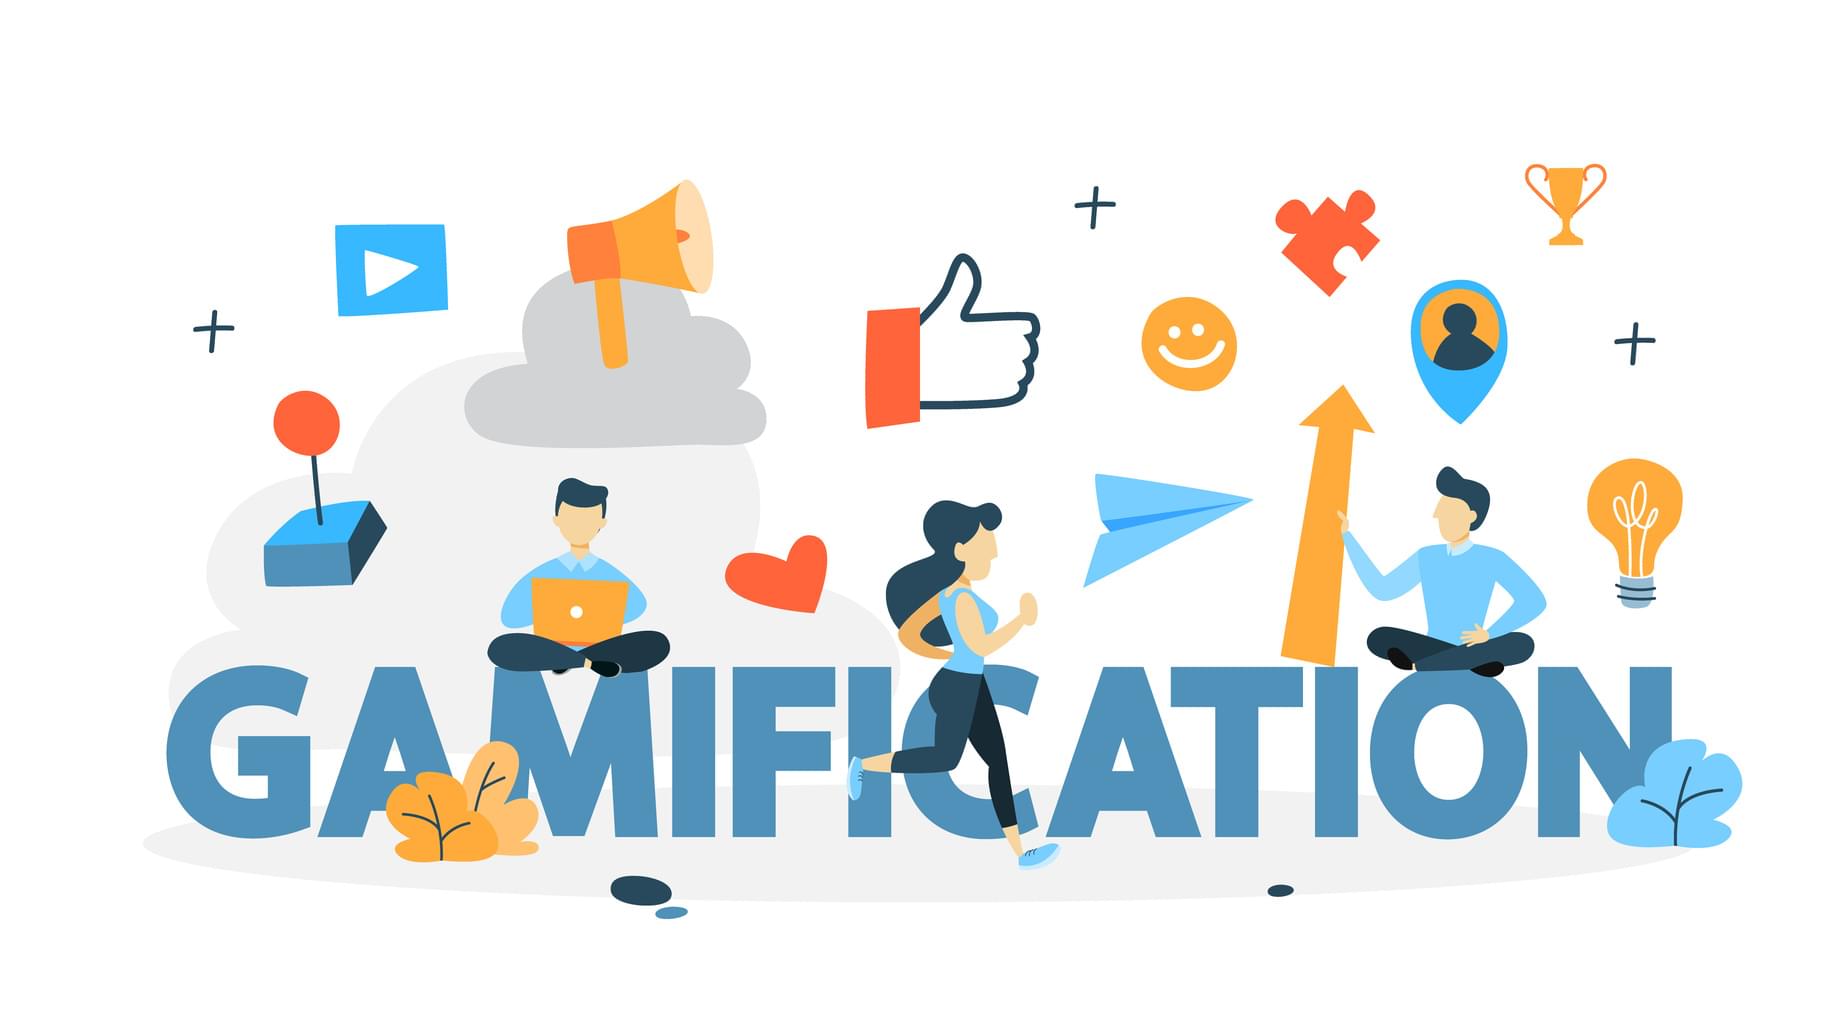 4 Sales Gamification Ideas to Improve Performance | TA